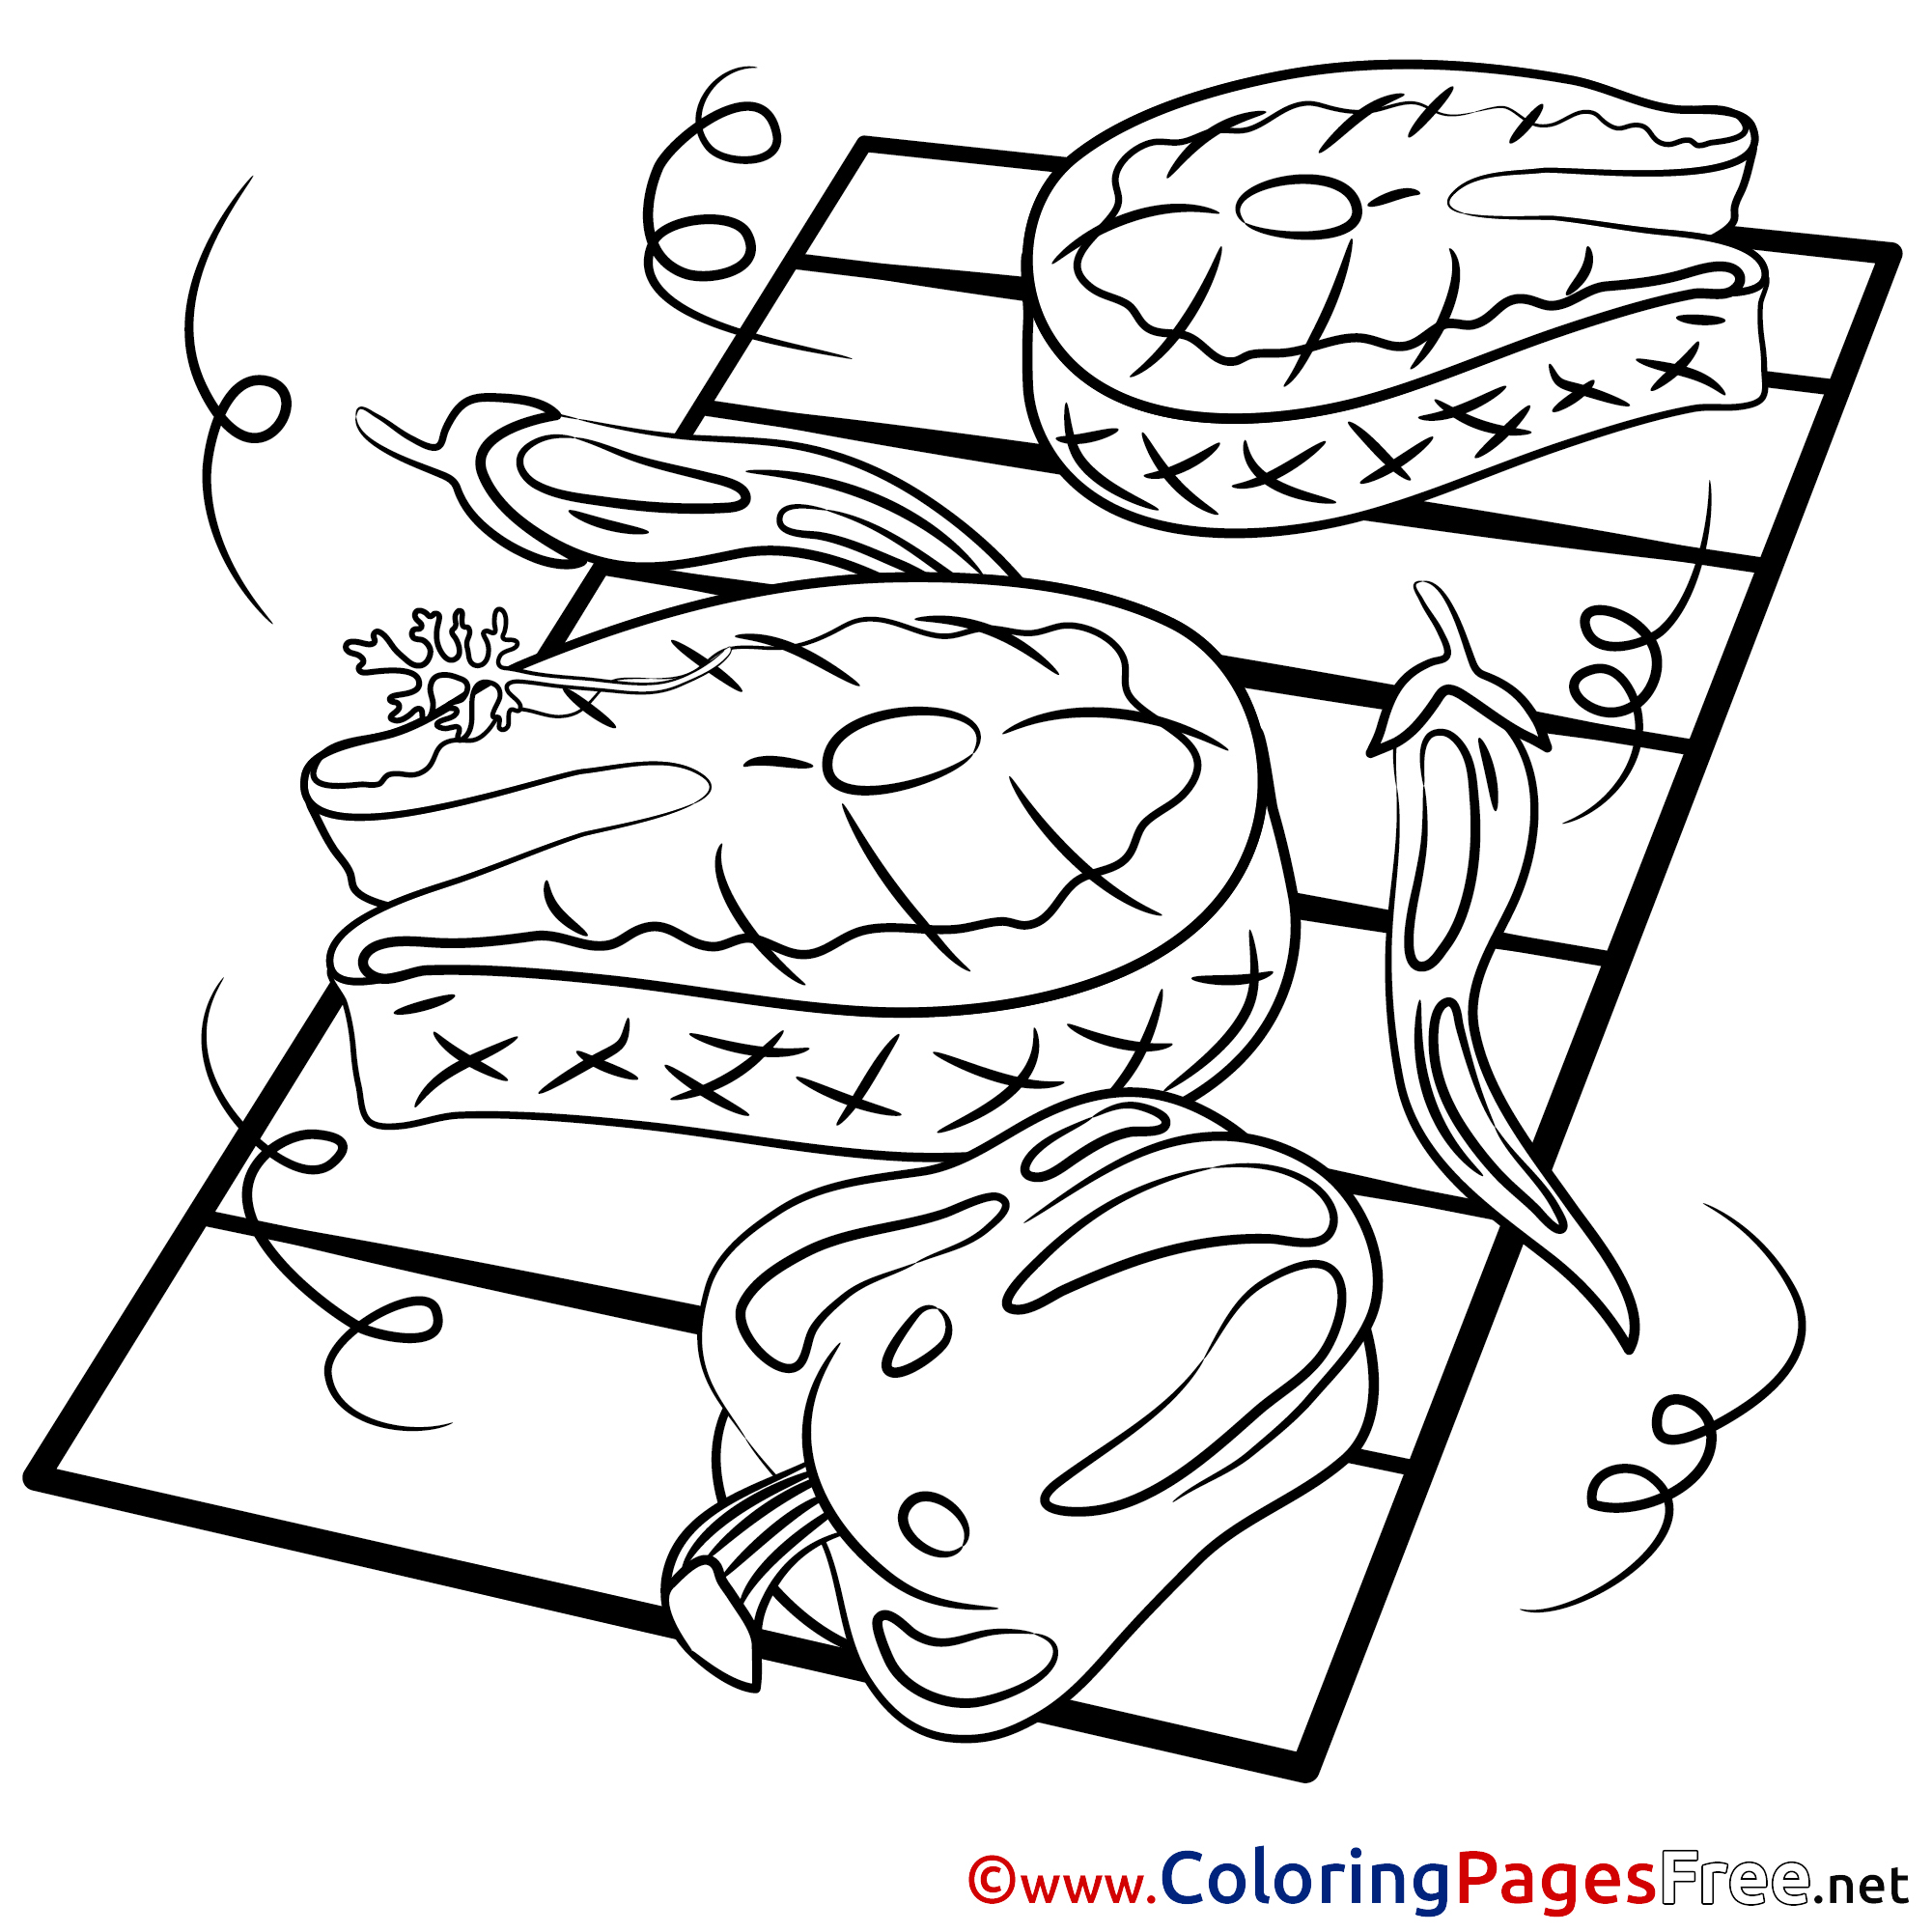 Meat Kids download Coloring Pages